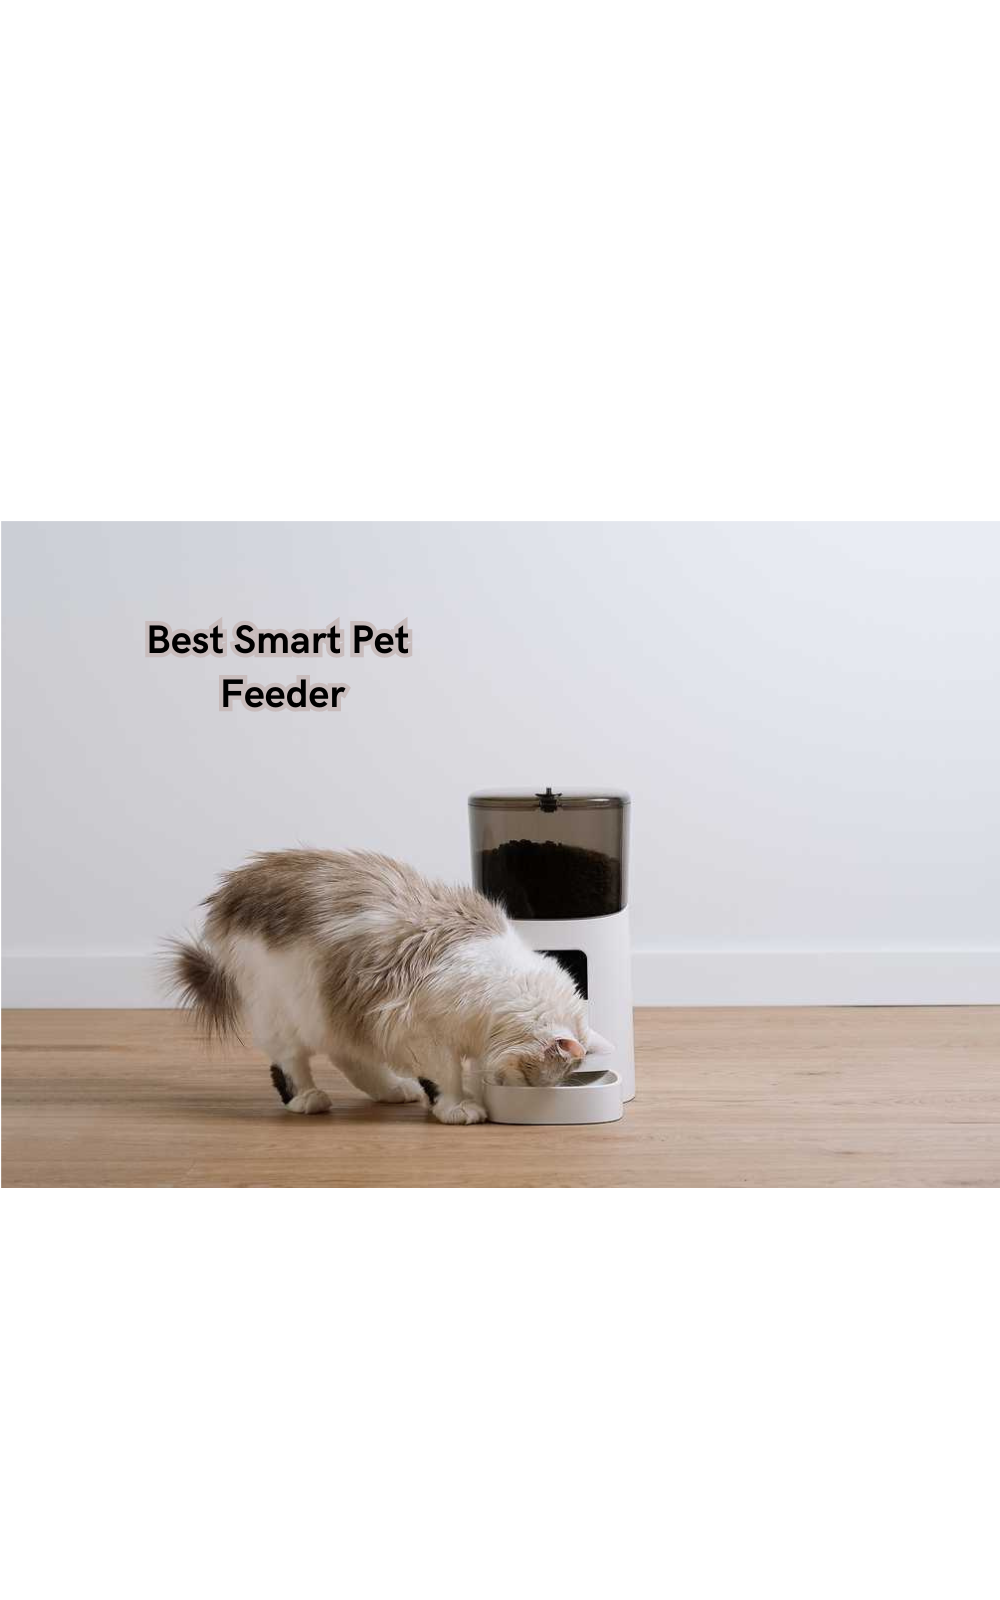 Discover the Future of Feeding Furry Friends: The Best Smart Pet Feeder